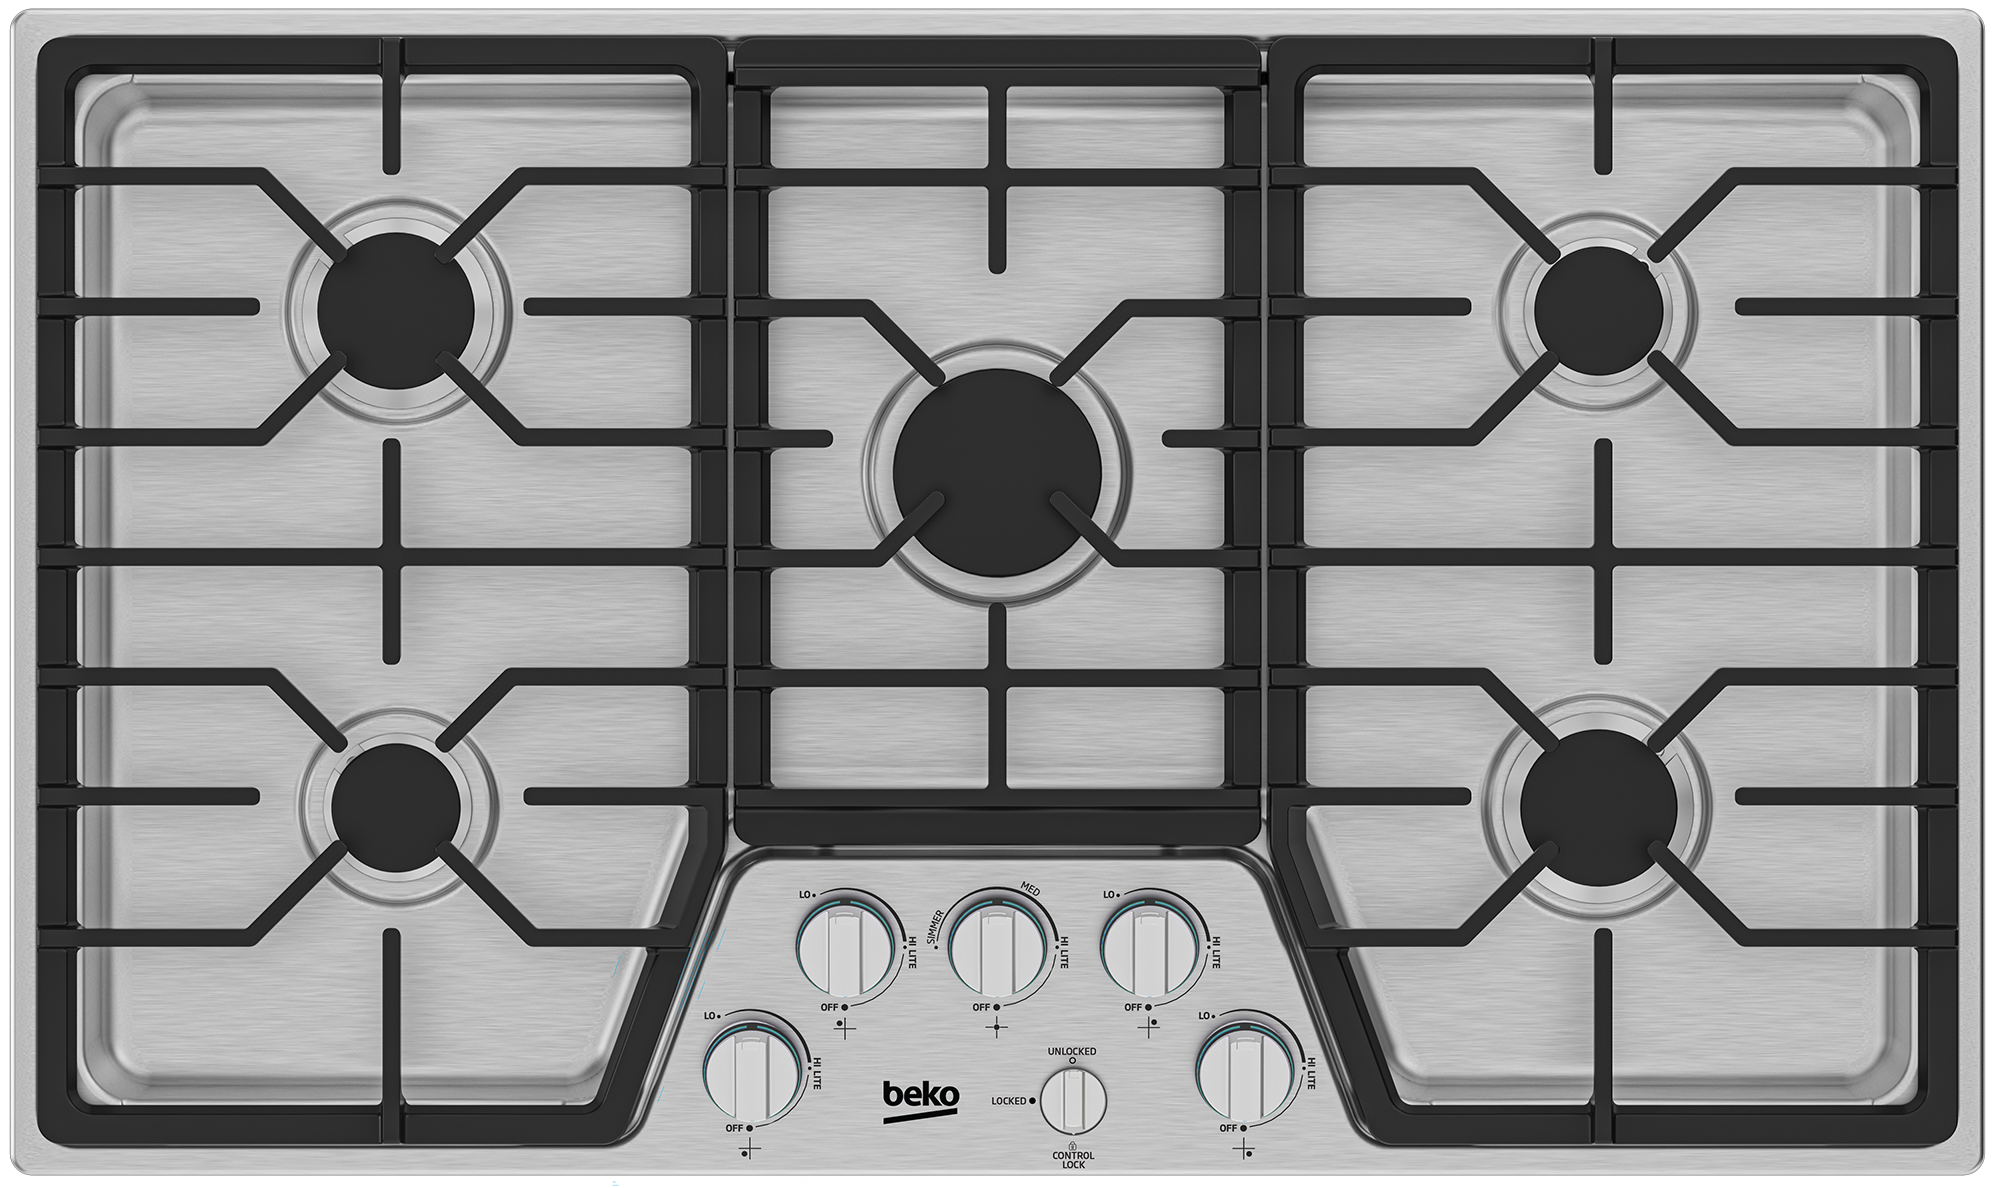 Gas Cooktop 36 inch Bulit-in Gas Stove Top with 5 Burner